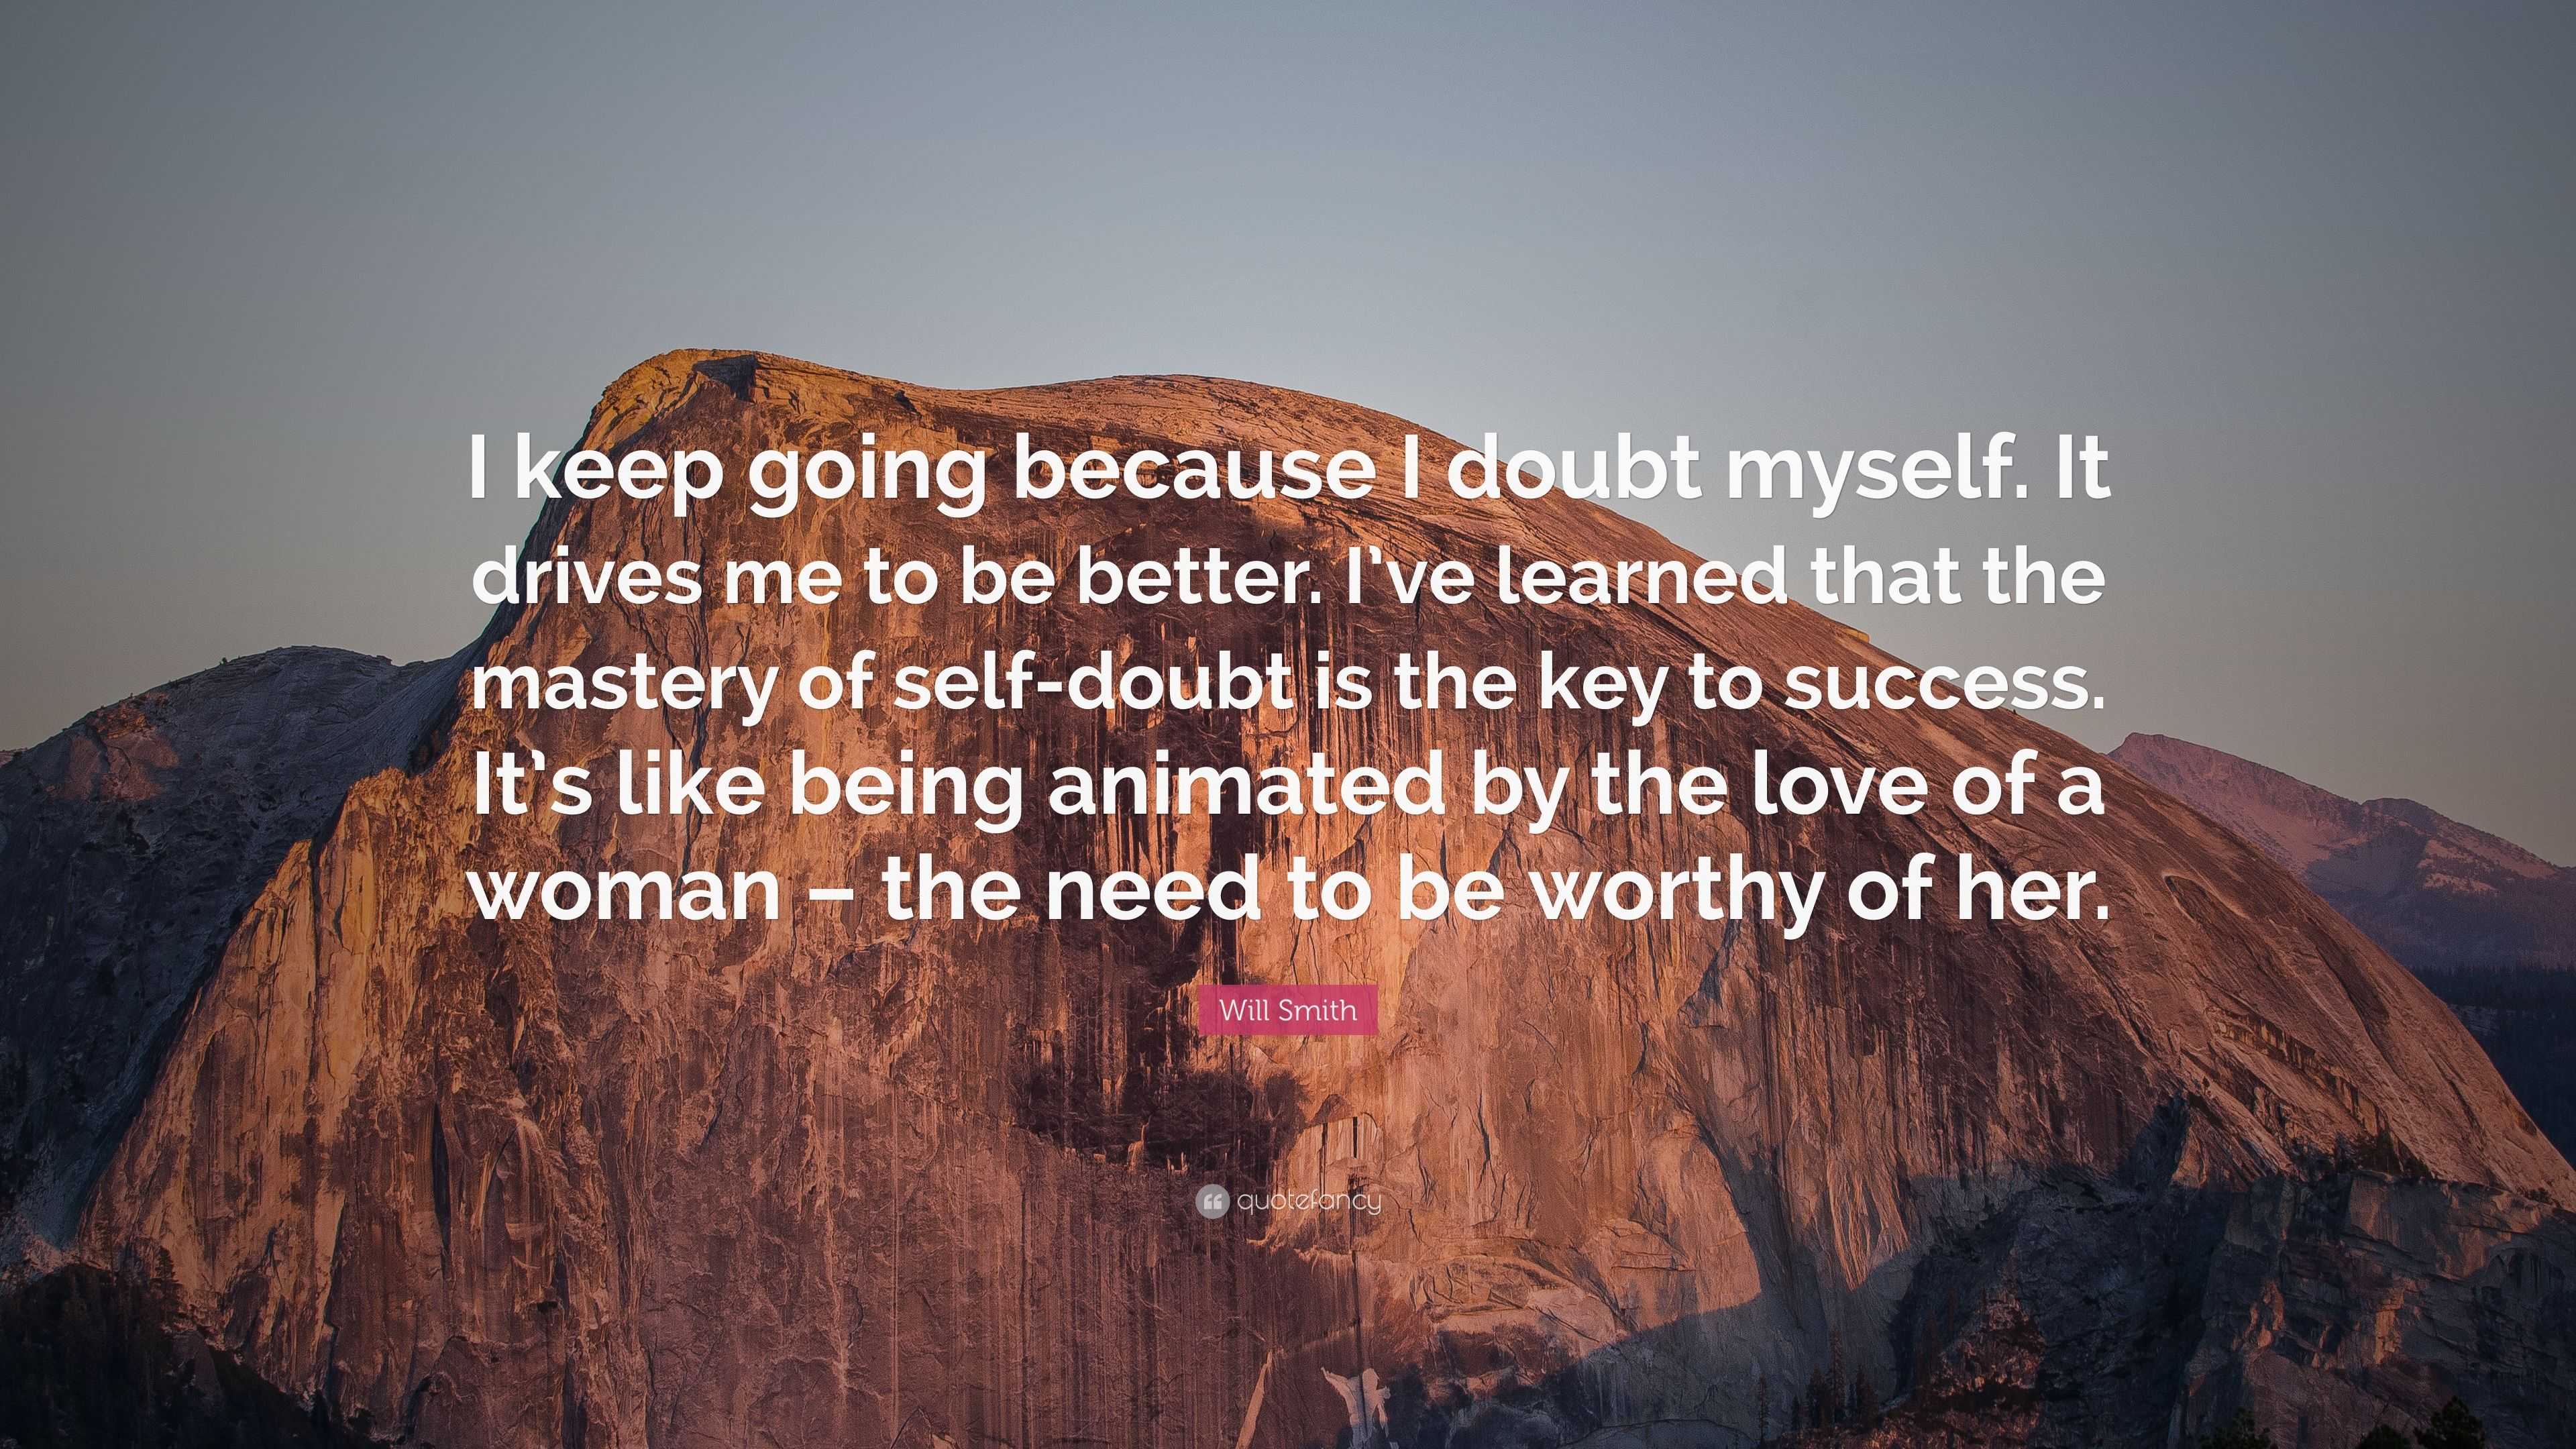 Will Smith Quote: “I keep going because I doubt myself. It drives me to ...